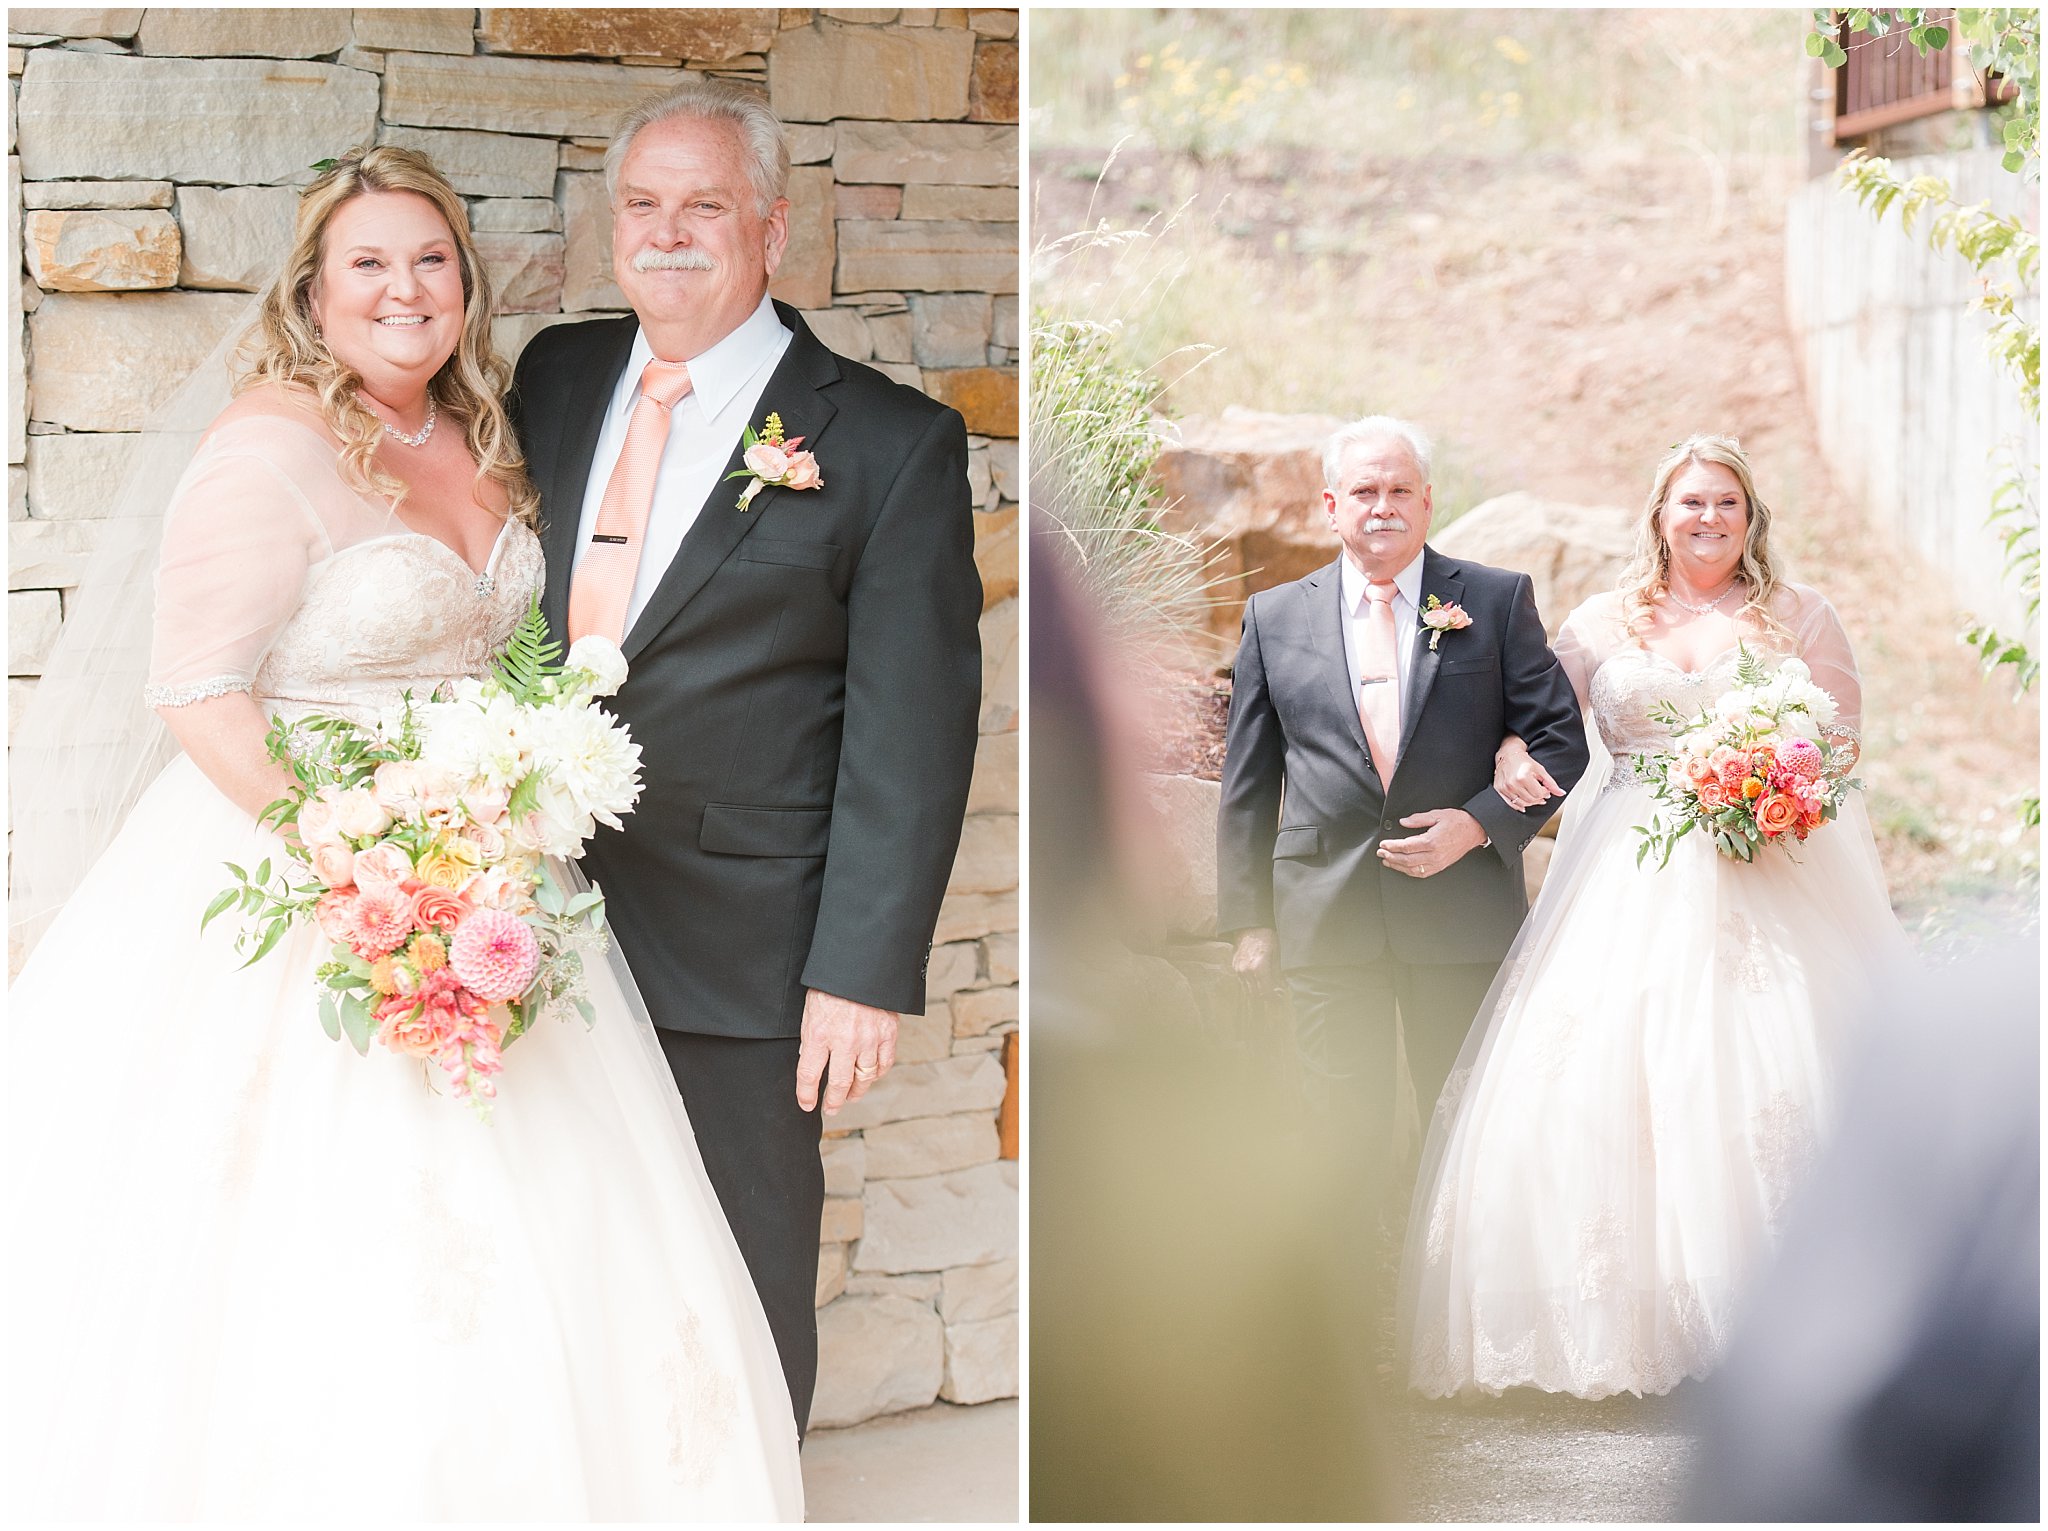 Butterfly wedding with sunset colors | Park City Wedding at the Hyatt Centric | Jessie and Dallin Photography